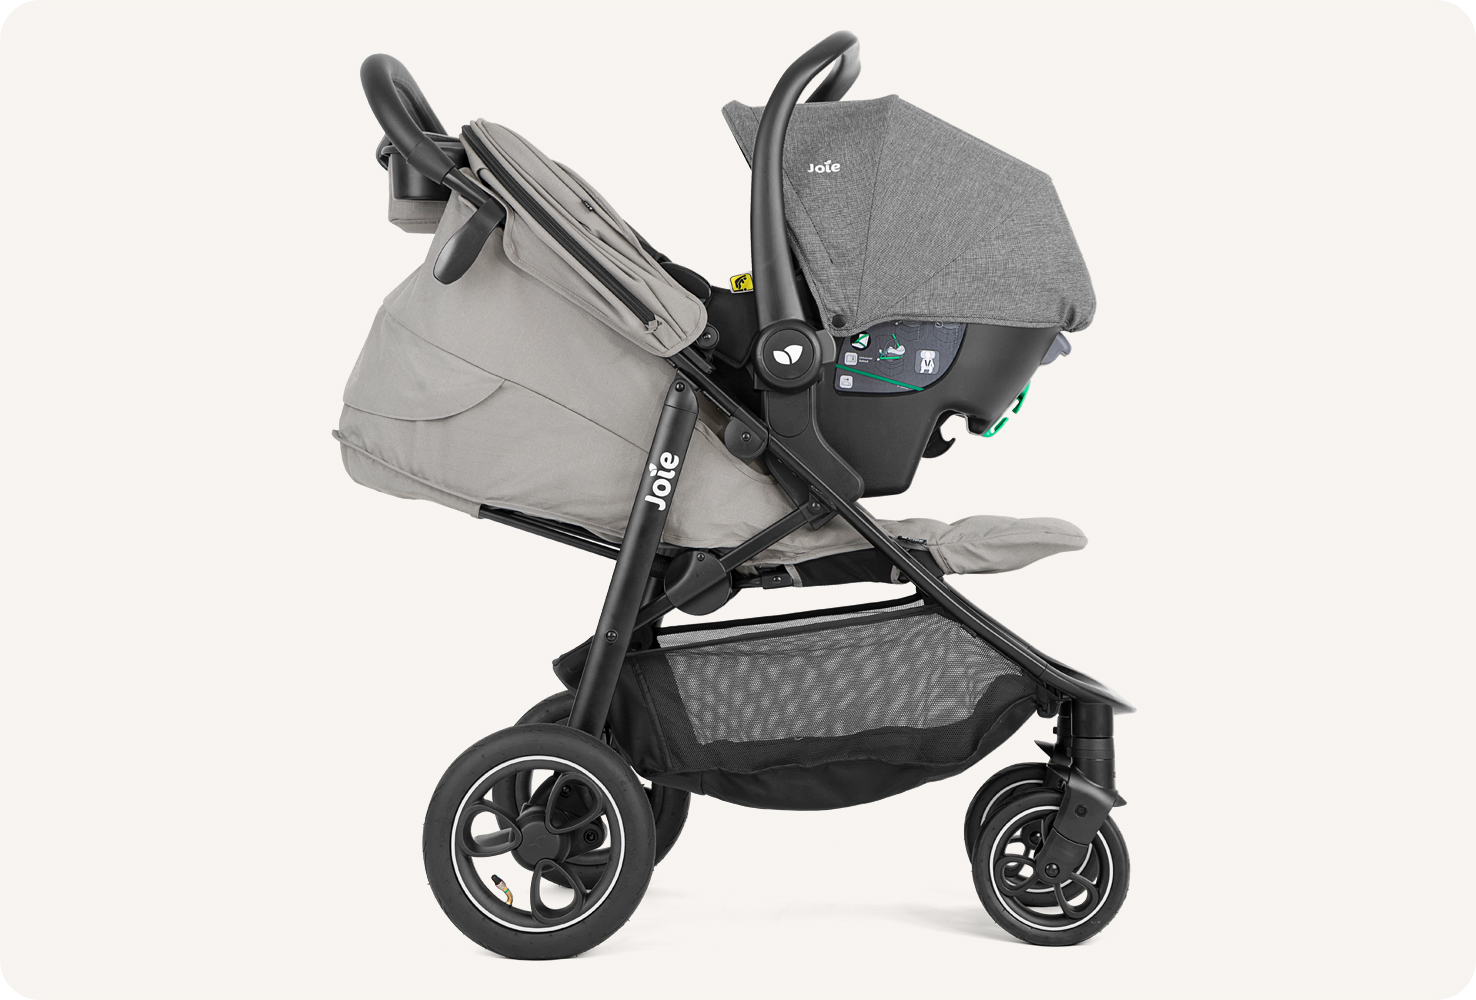  Joie litetrax pro air stoller in gray with infant carrier attached. 